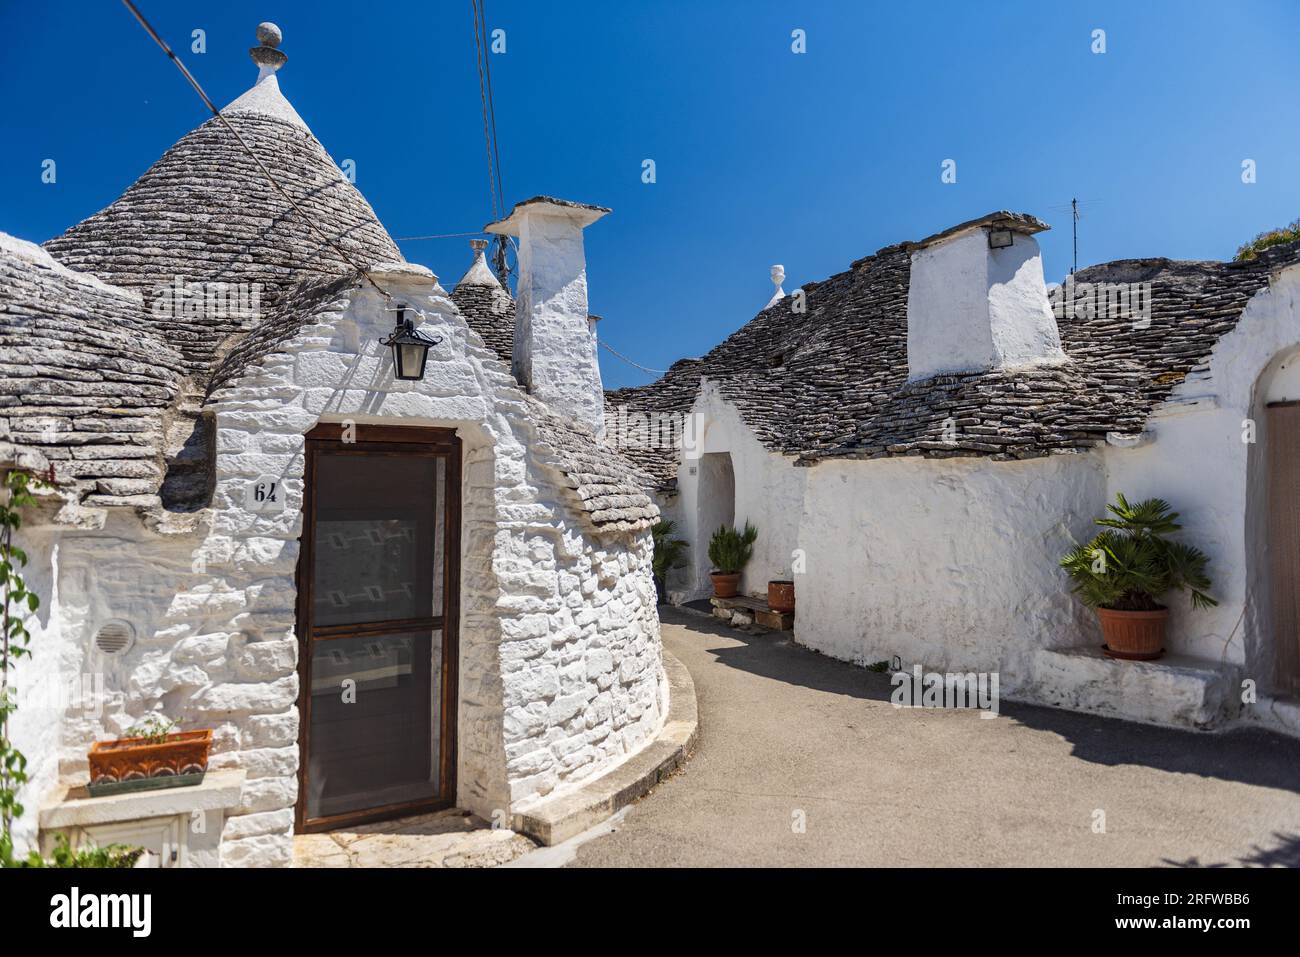 ITALY, PUGLIA, TRULLIS OF THE VILLAGE OF ALBEROBELLO, LISTED AS WORLD HERITAGE BY UNESCO. TRULLI ARE DRY-STONE DWELLINGS. THESE ARE REMARKABLE EXAMPLE Stock Photo